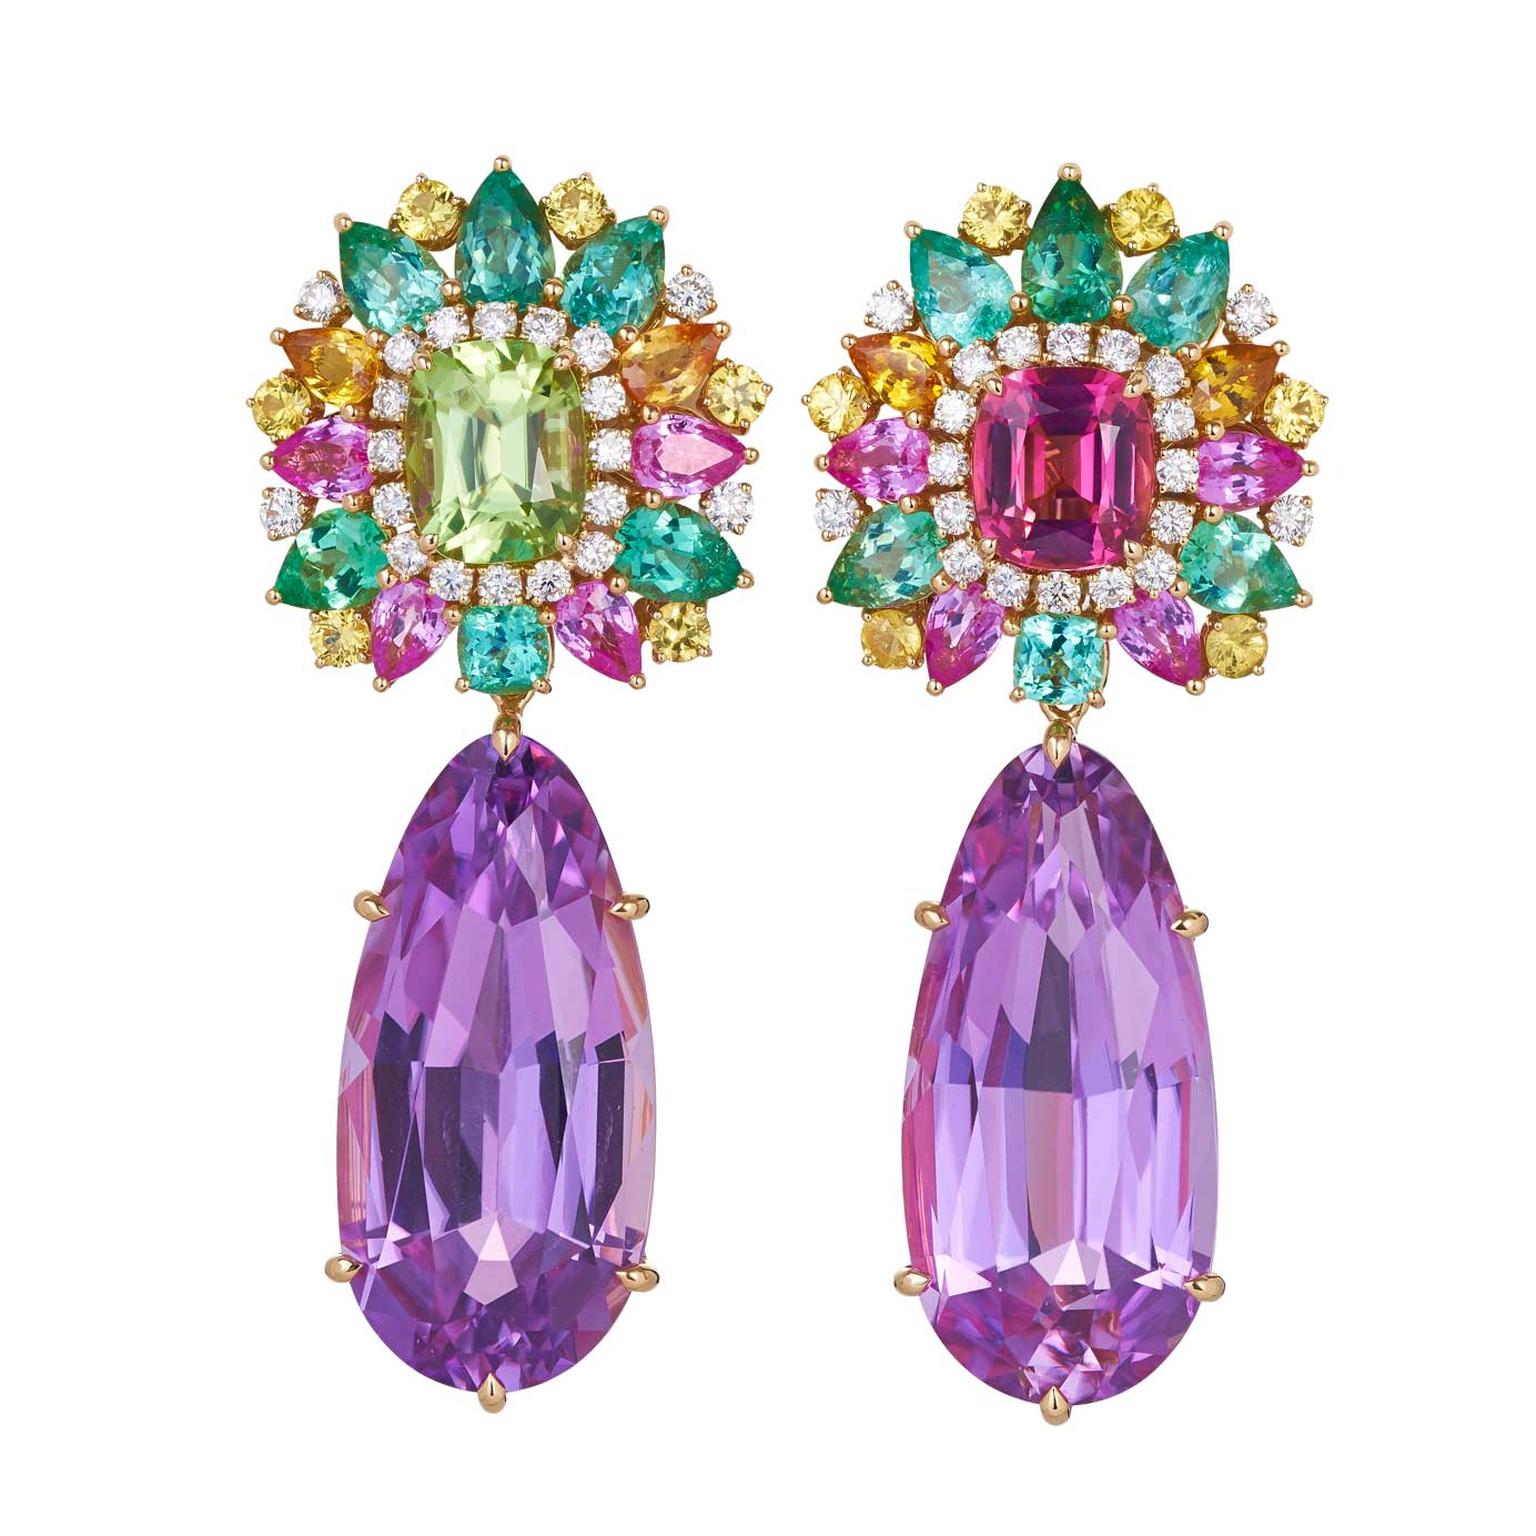 On a high: candy bright jewels